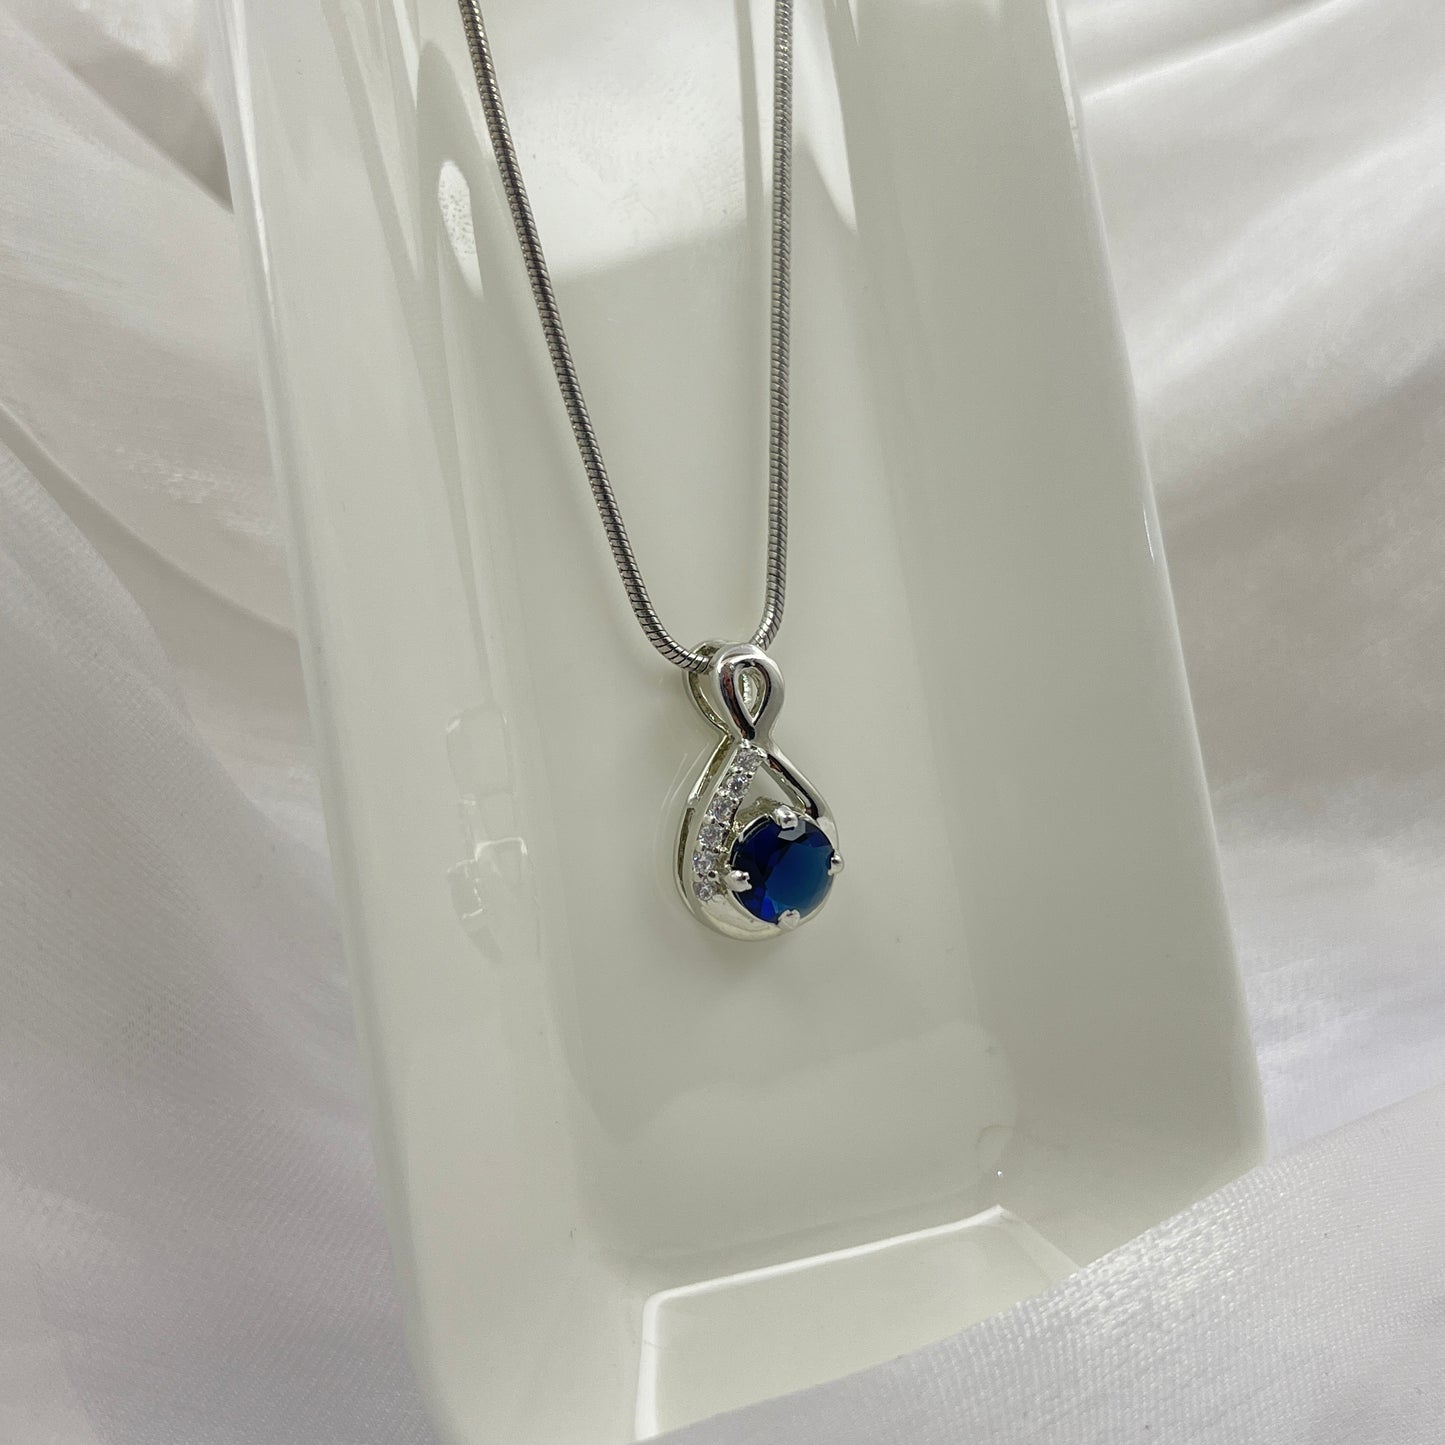 BREAUTTY 925 STERLING SILVER LONDON BLUE TOPAZ SOLITAIRE PENDANT CHAIN | RHODIUM POLISHED